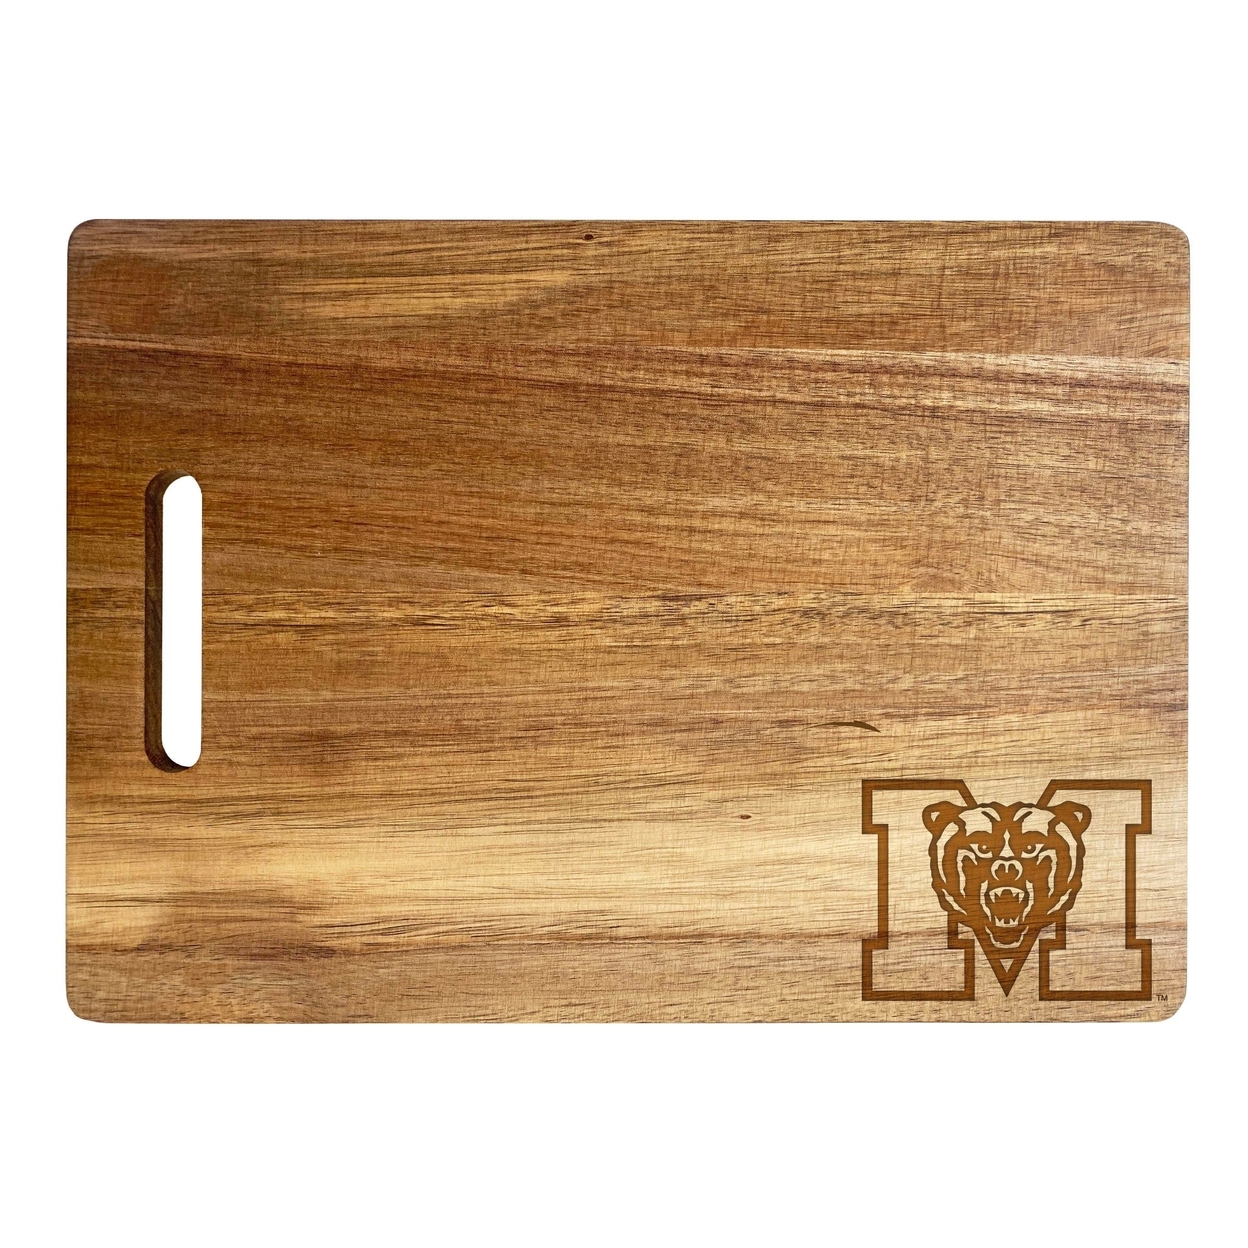 Mercer University Engraved Wooden Cutting Board 10 X 14 Acacia Wood - Small Engraving